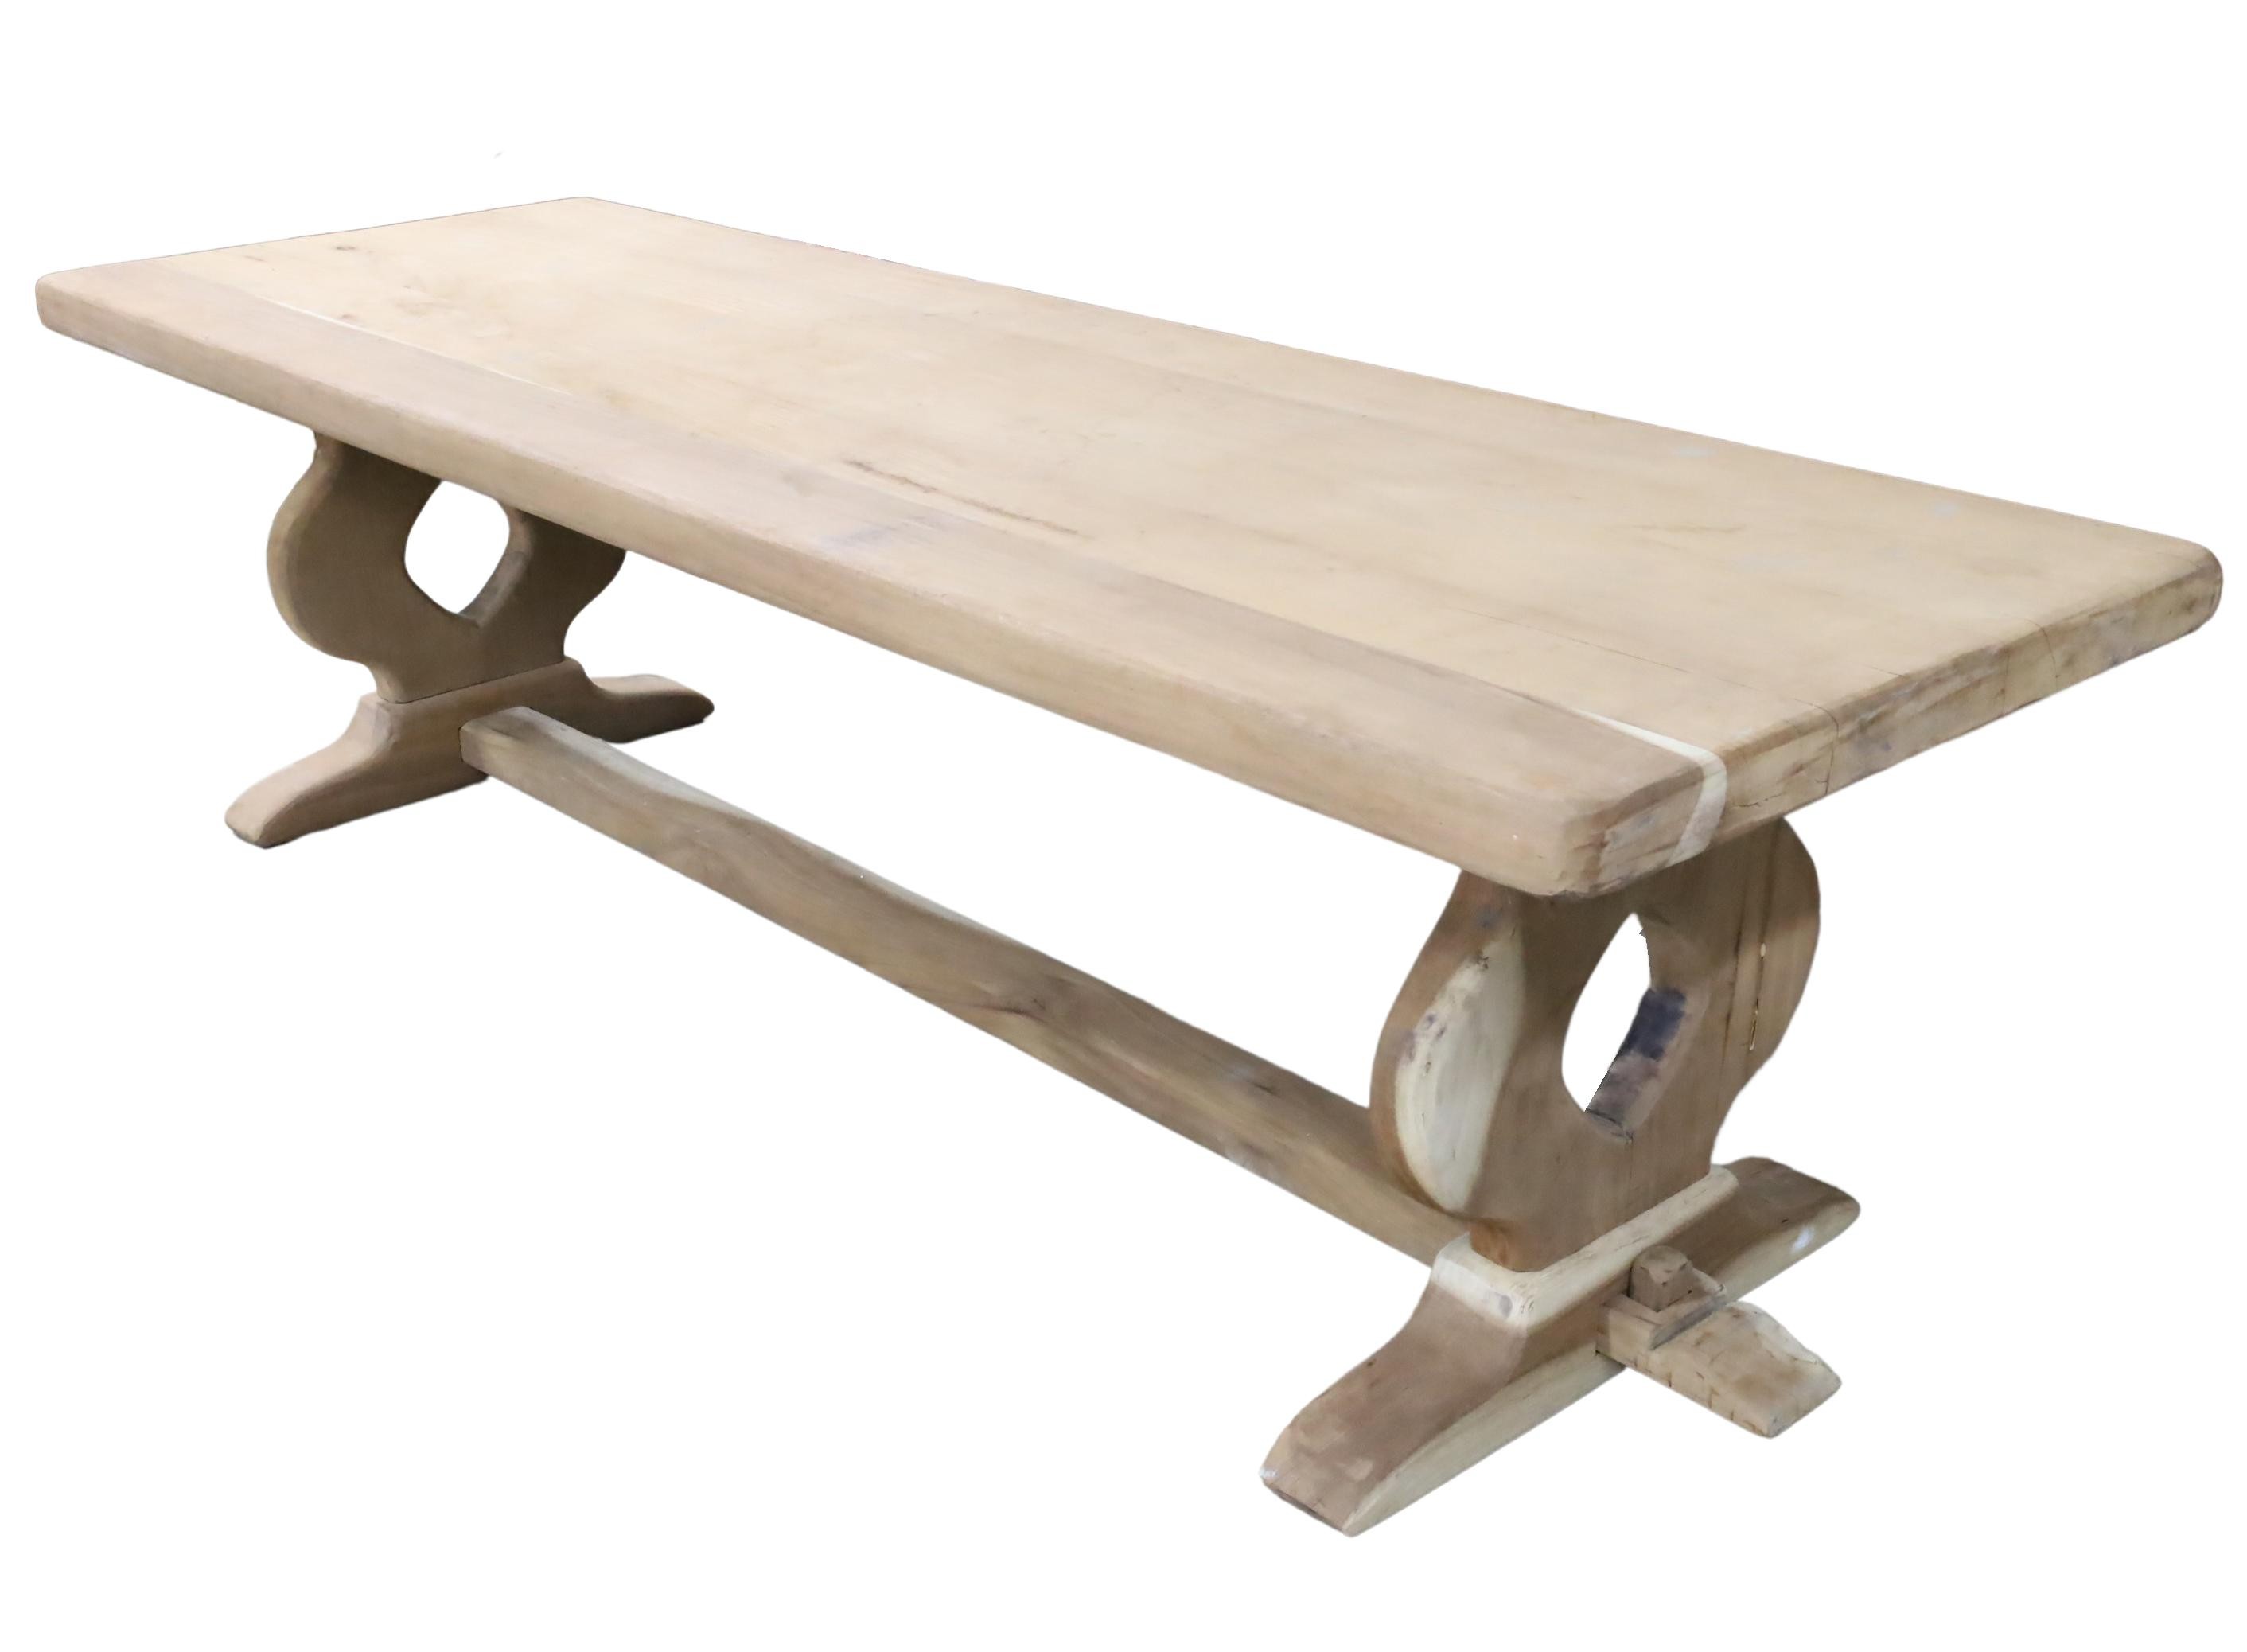 RUSTIC FRENCH FARMHOUSE STYLE TABLE 2f8bf4